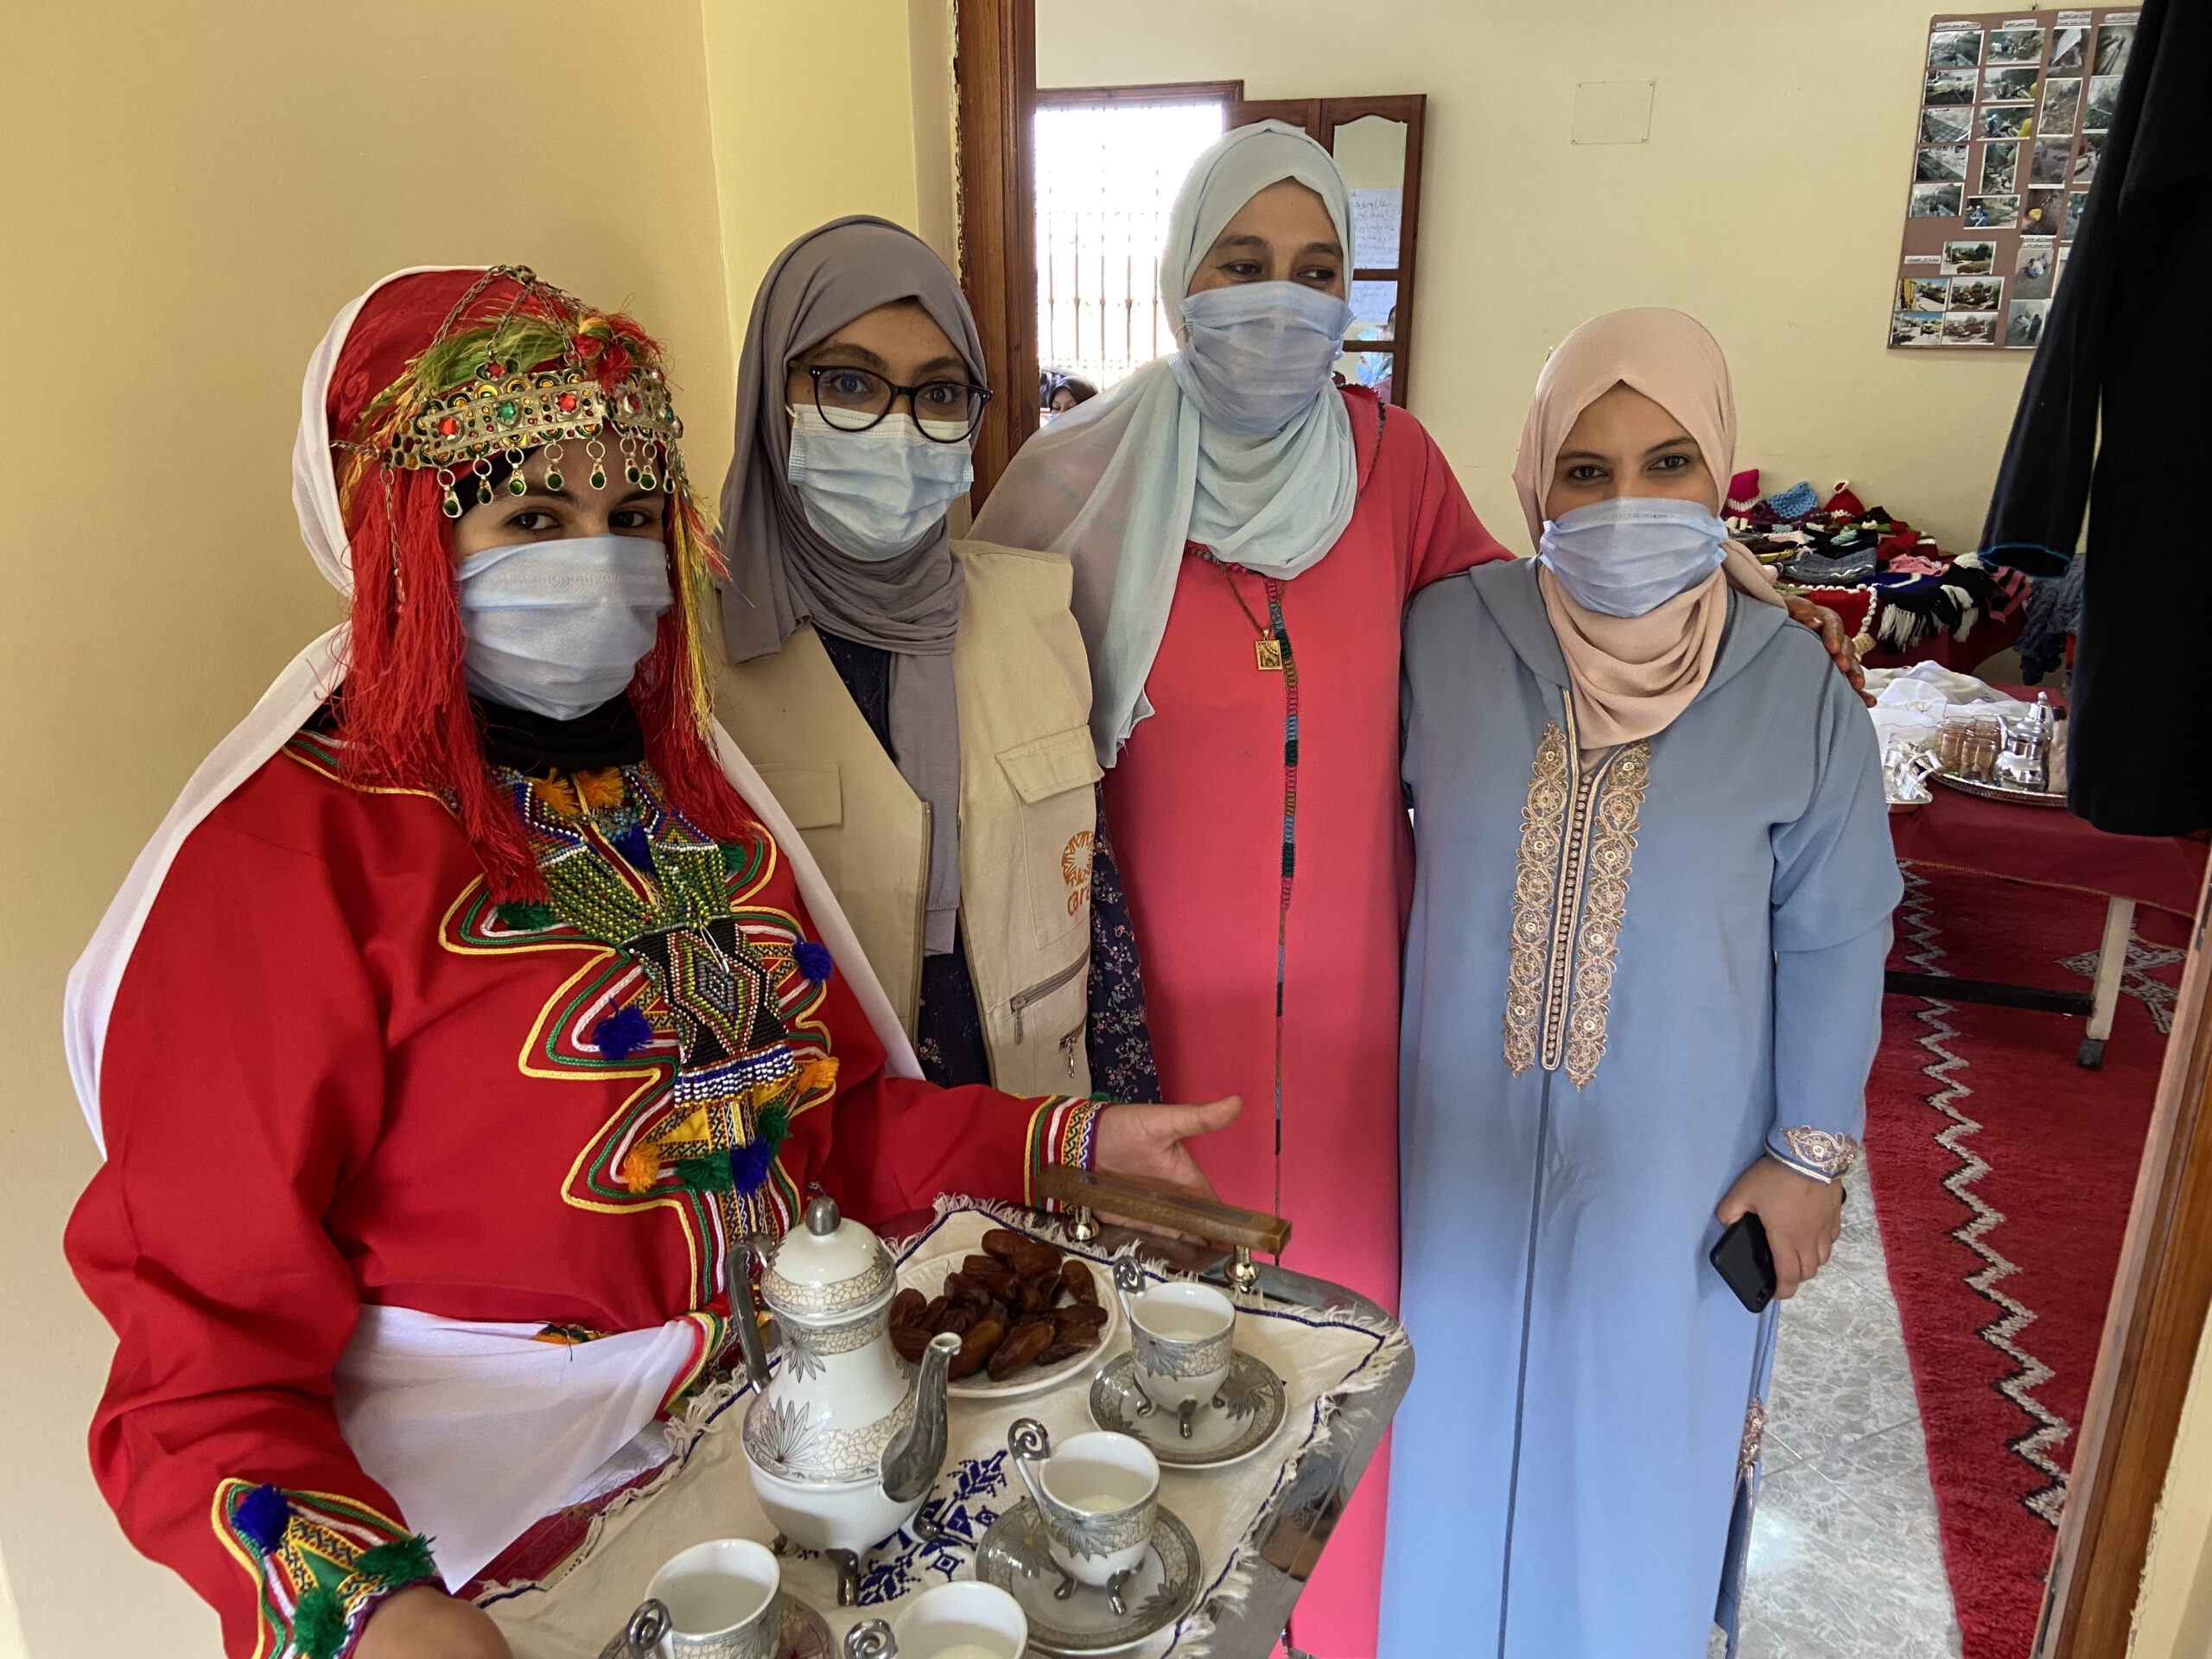 4 women standing together in a line for a photo. The woman on the far right is holding a tea tray with a tea pot and various items on it.